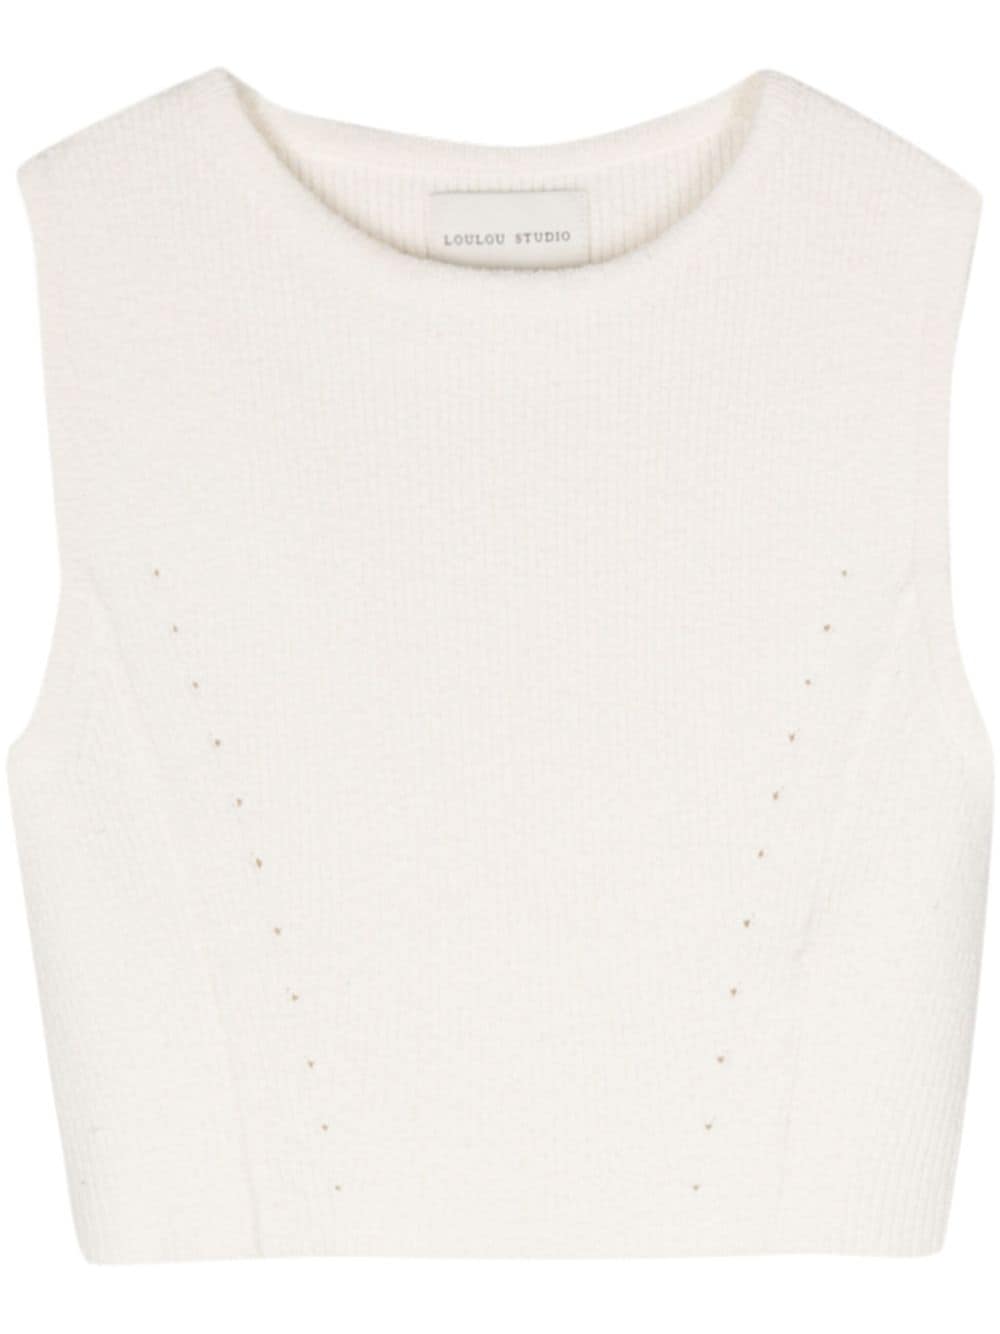 Loulou Studio ribbed cropped top - Neutrals von Loulou Studio